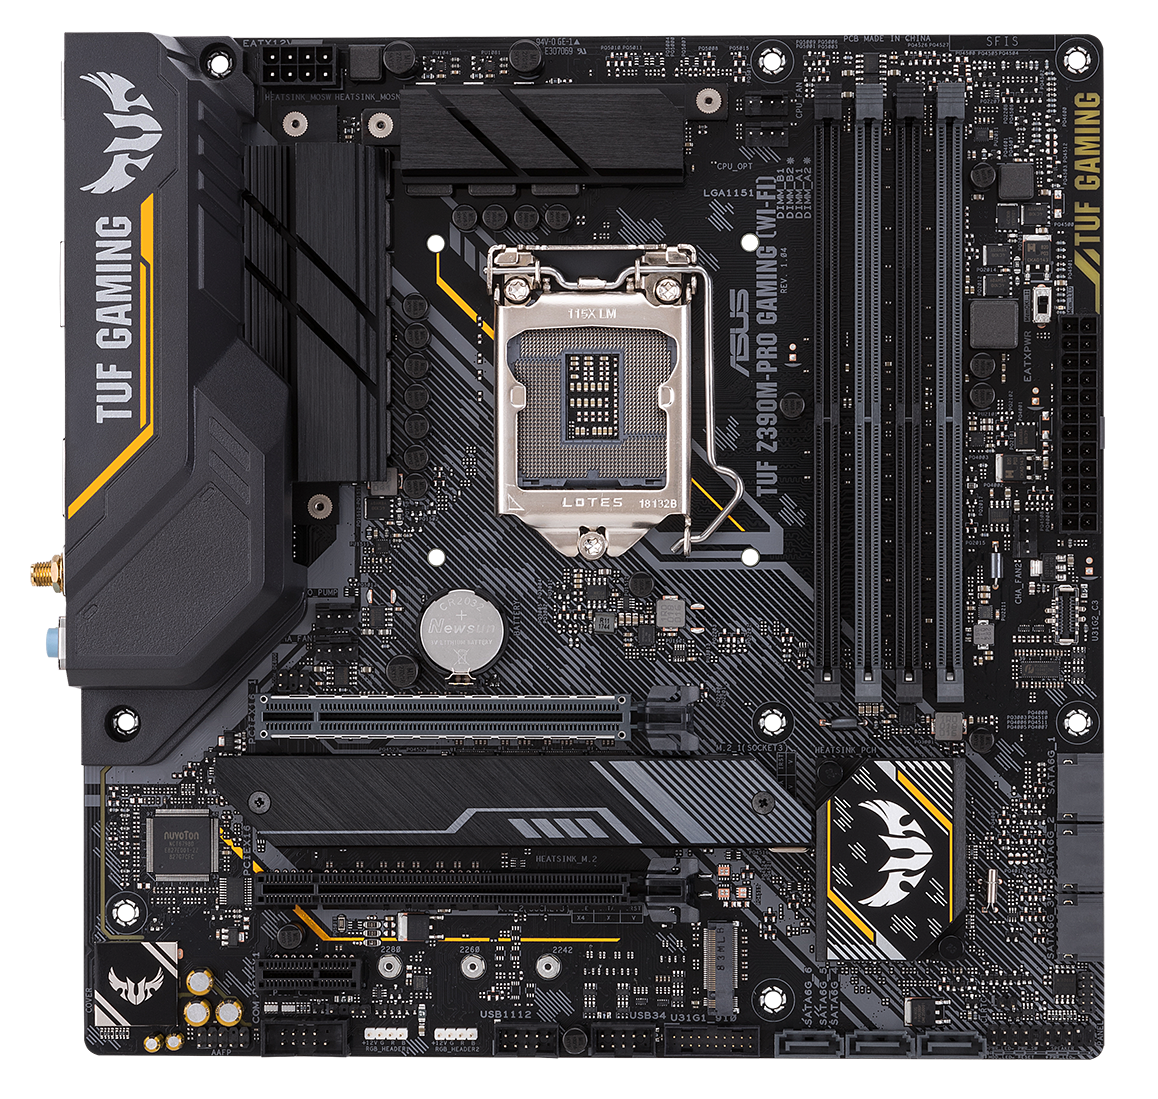 ASUS TUF Z390M Pro Gaming - Intel Z390 Motherboard Overview: 50+